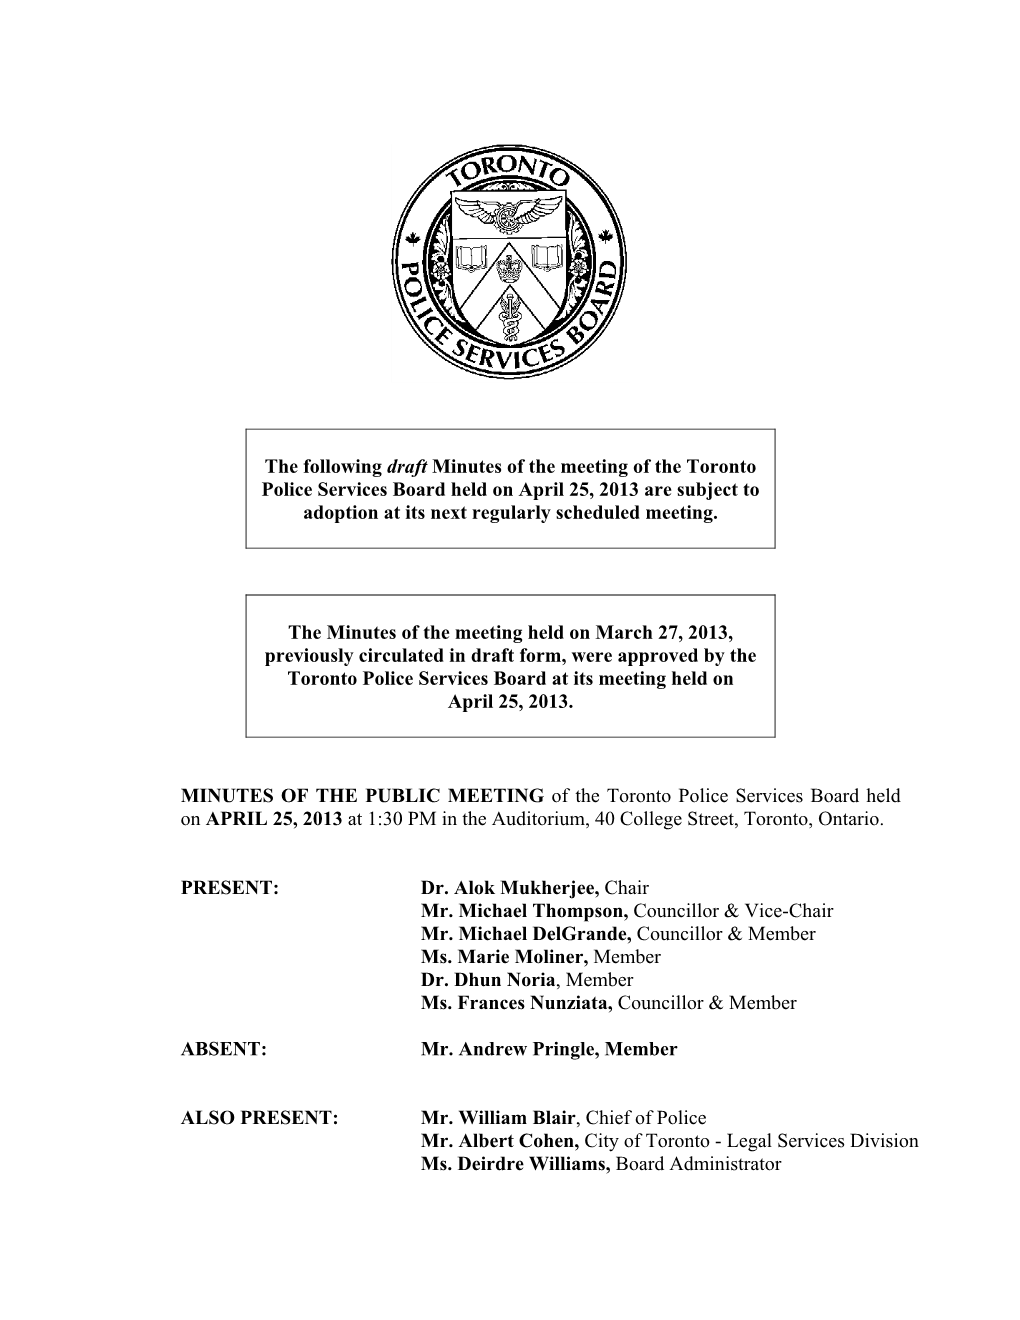 The Following Draft Minutes of the Meeting of the Toronto Police Services Board Held on April 25, 2013 Are Subject to Adoption at Its Next Regularly Scheduled Meeting